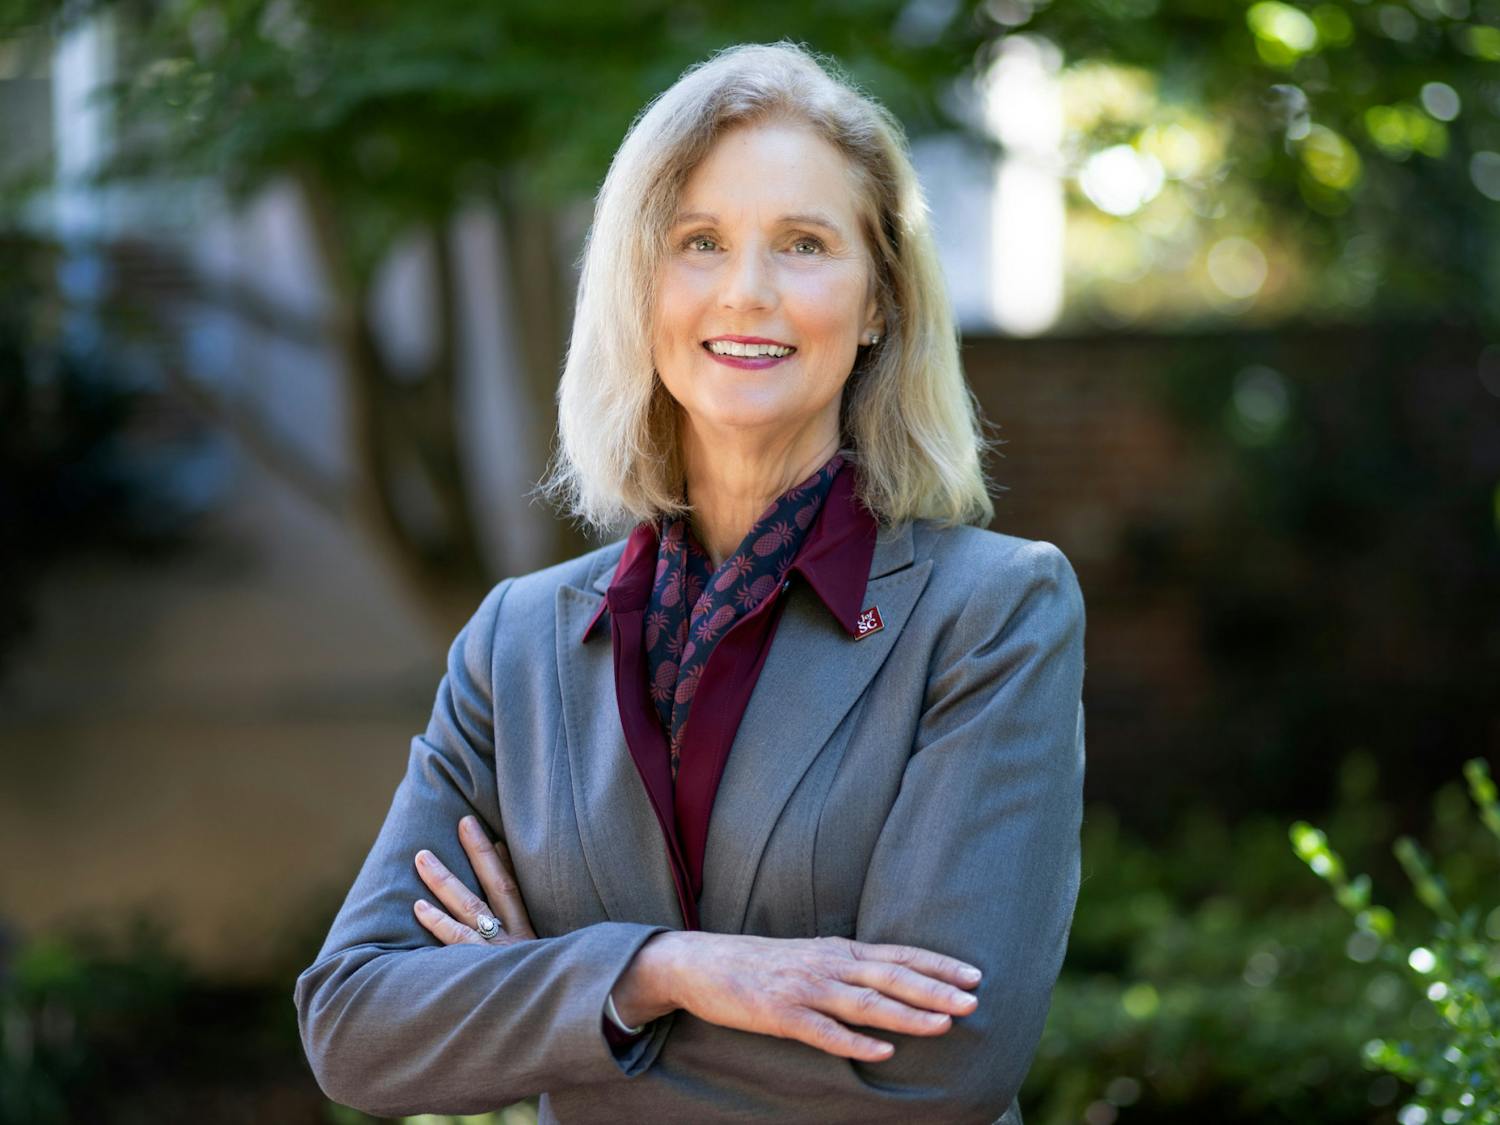 USC provost, Donna Arnett poses on the Columbia campus. Donna Arnett, former Dean of Public Health at the University of Kentucky, was selected as USC's newest provost in April 2022.